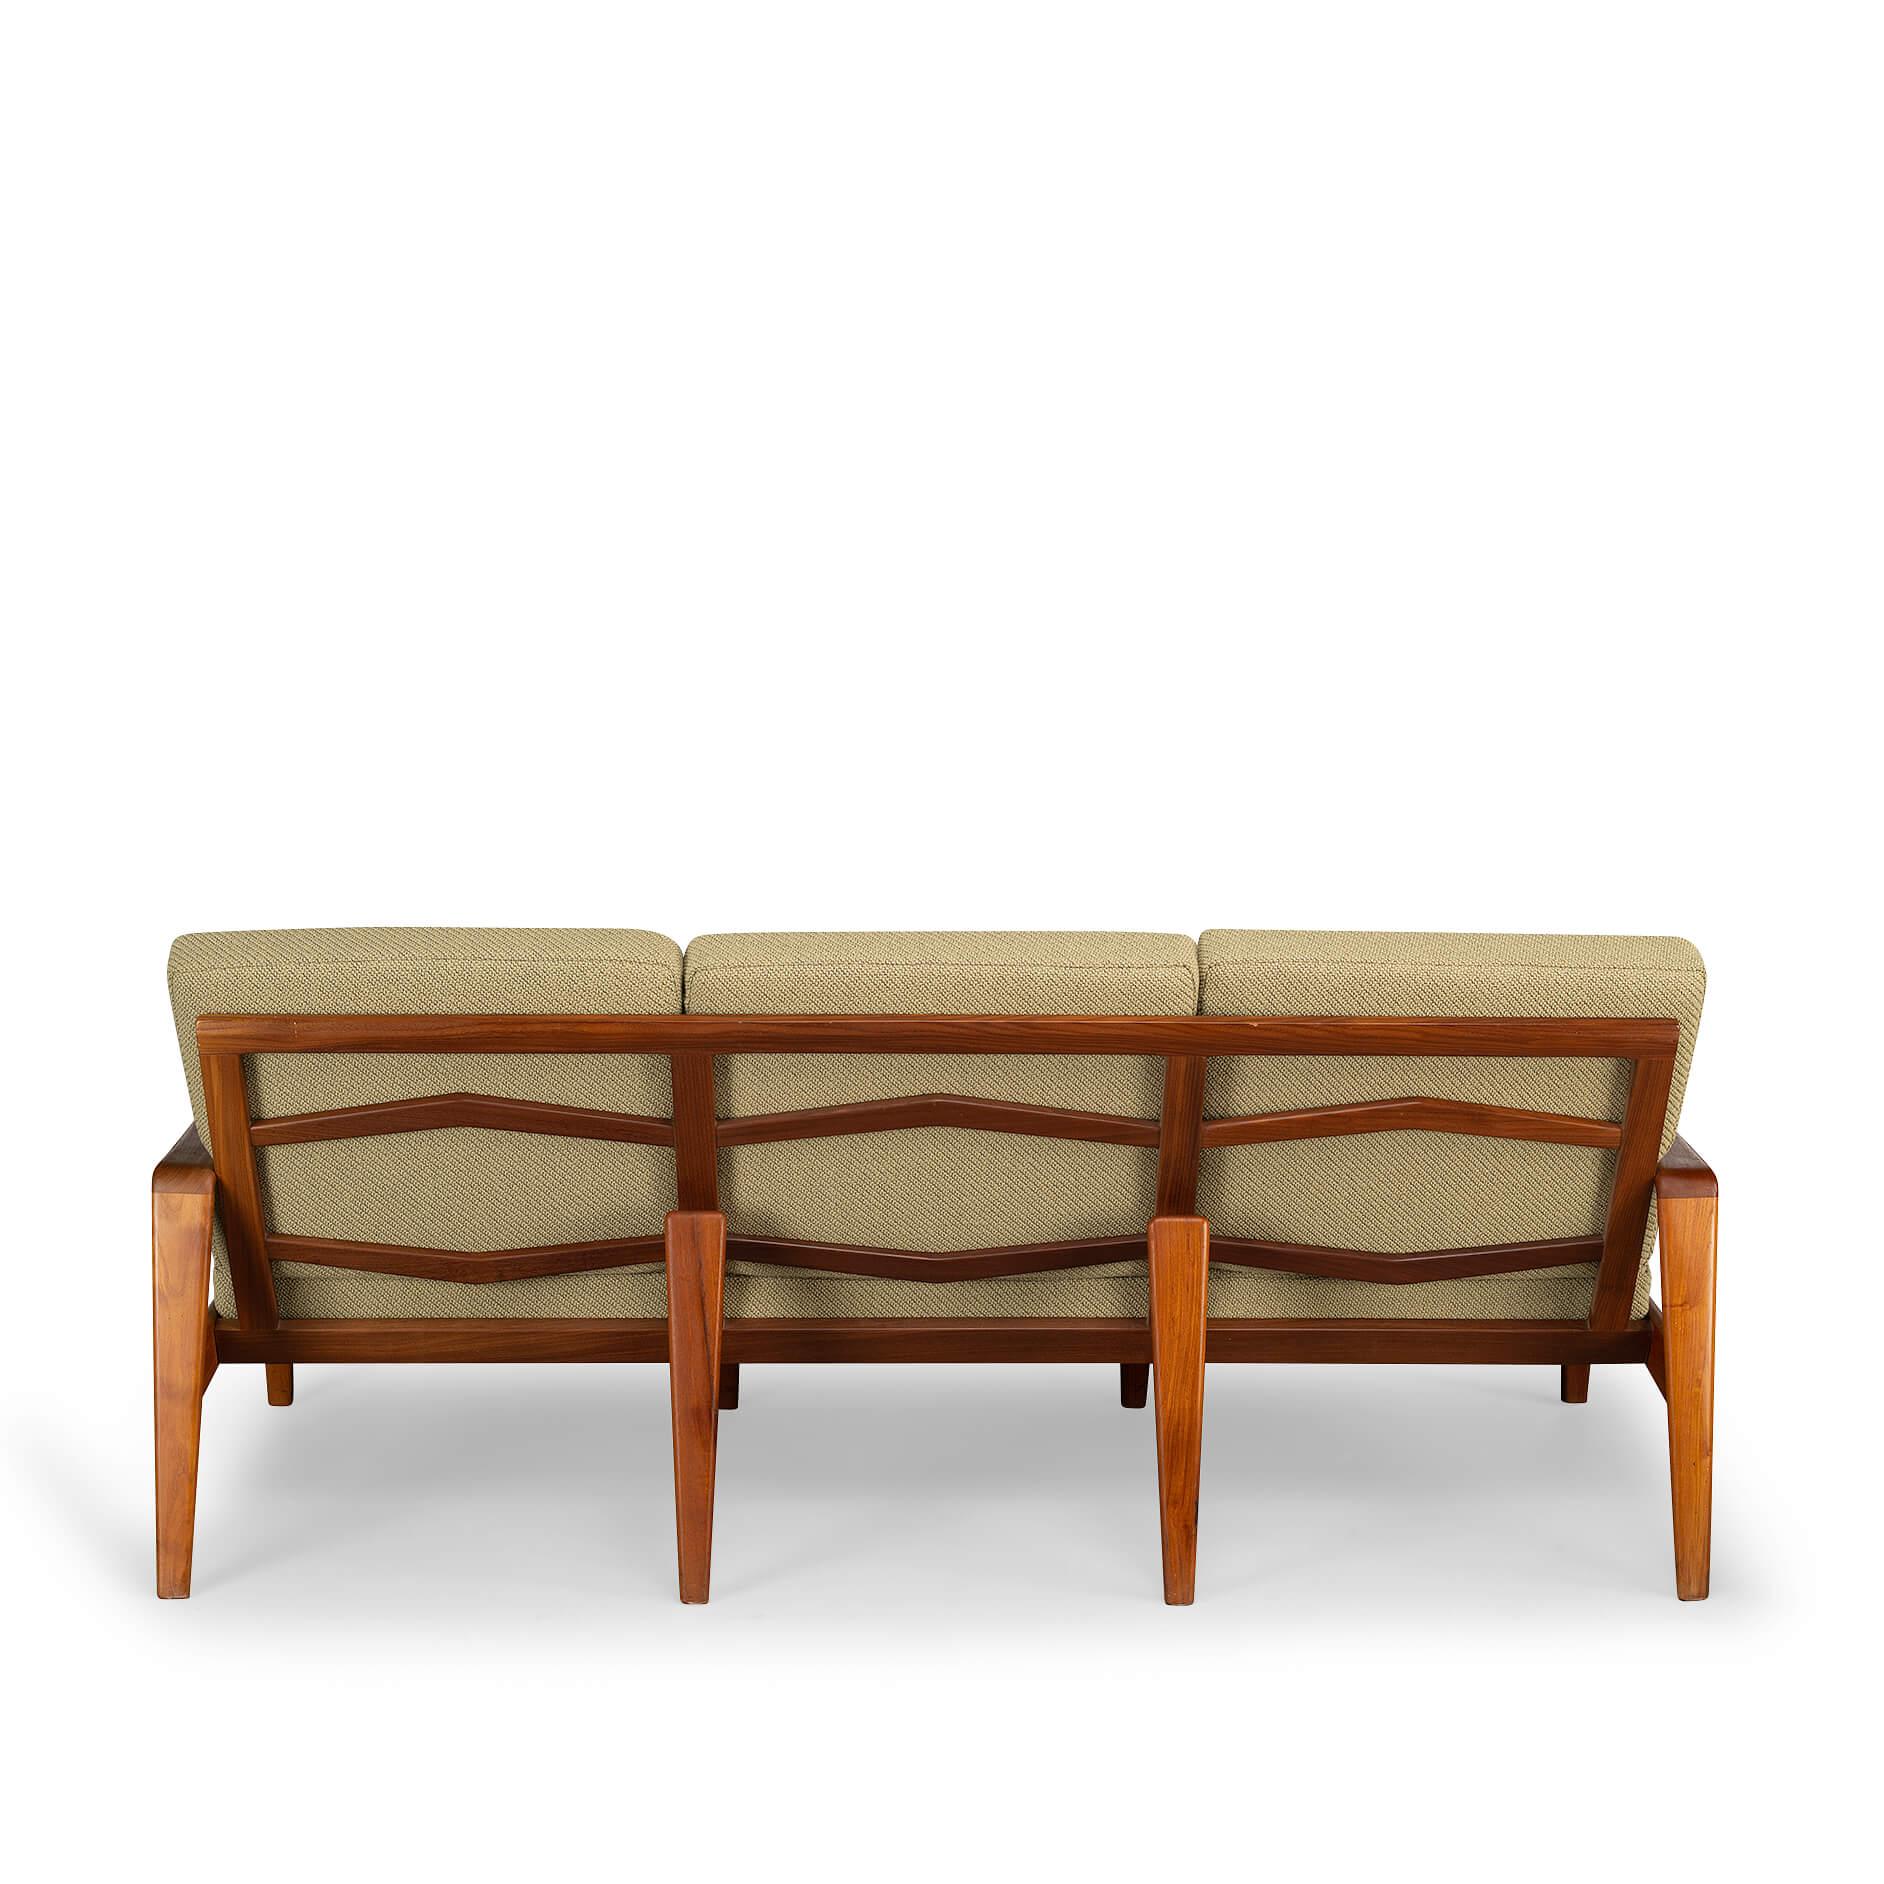 Fabric Danish Reupholstered Sofa by Model No. 35 by Arne Wahl Iversen, 1960s For Sale